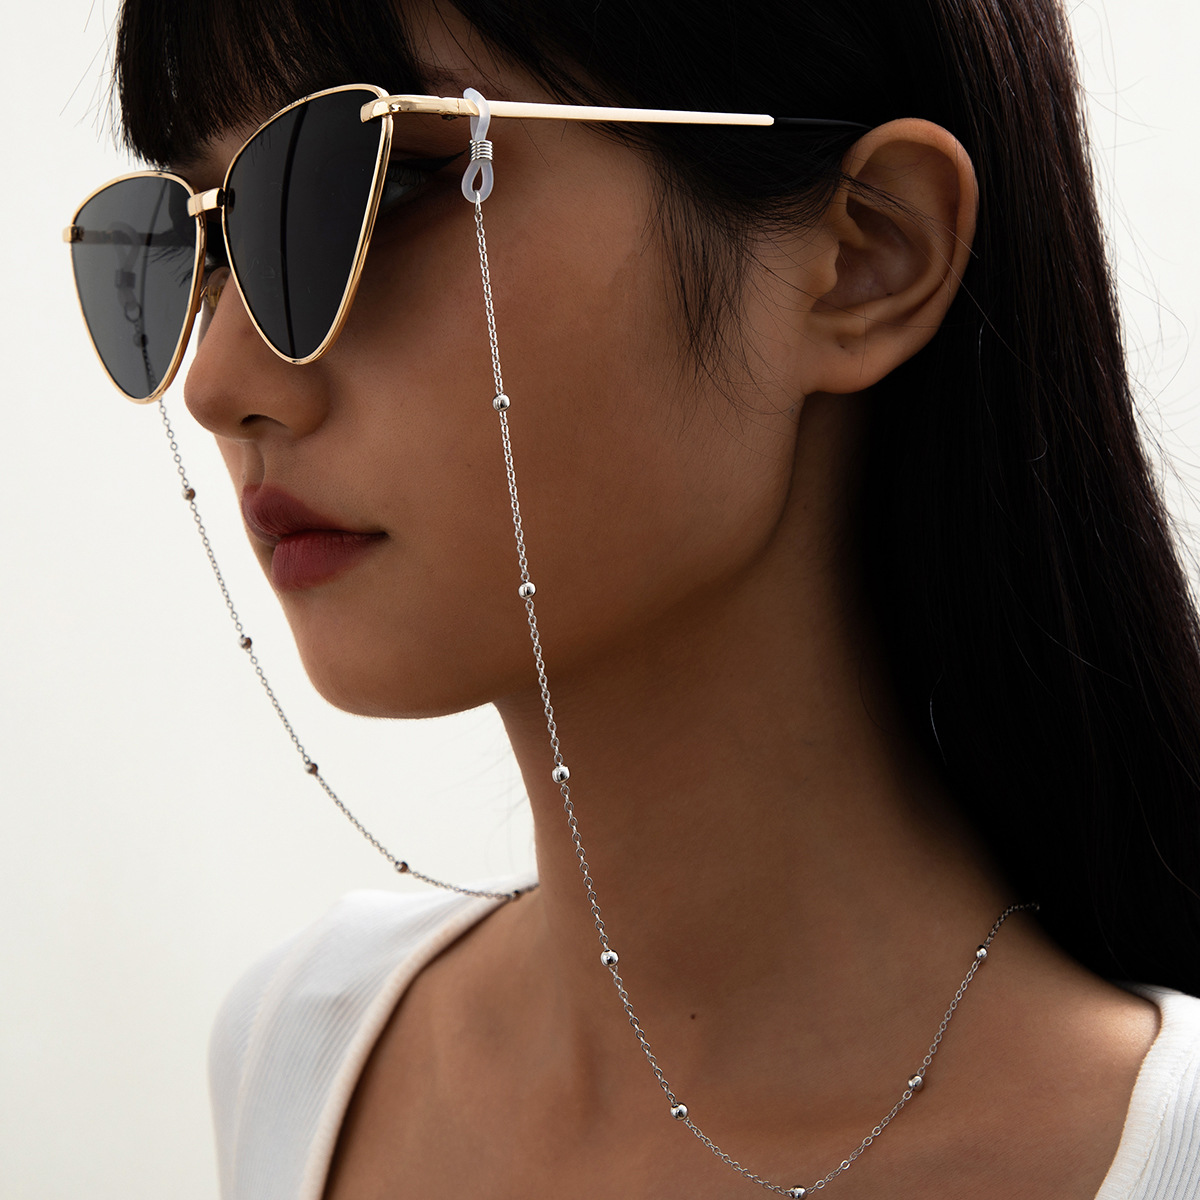 Imitation Pearl Round Bead Glasses Chain Cold Air Metal Chain Mask Chain-silvery